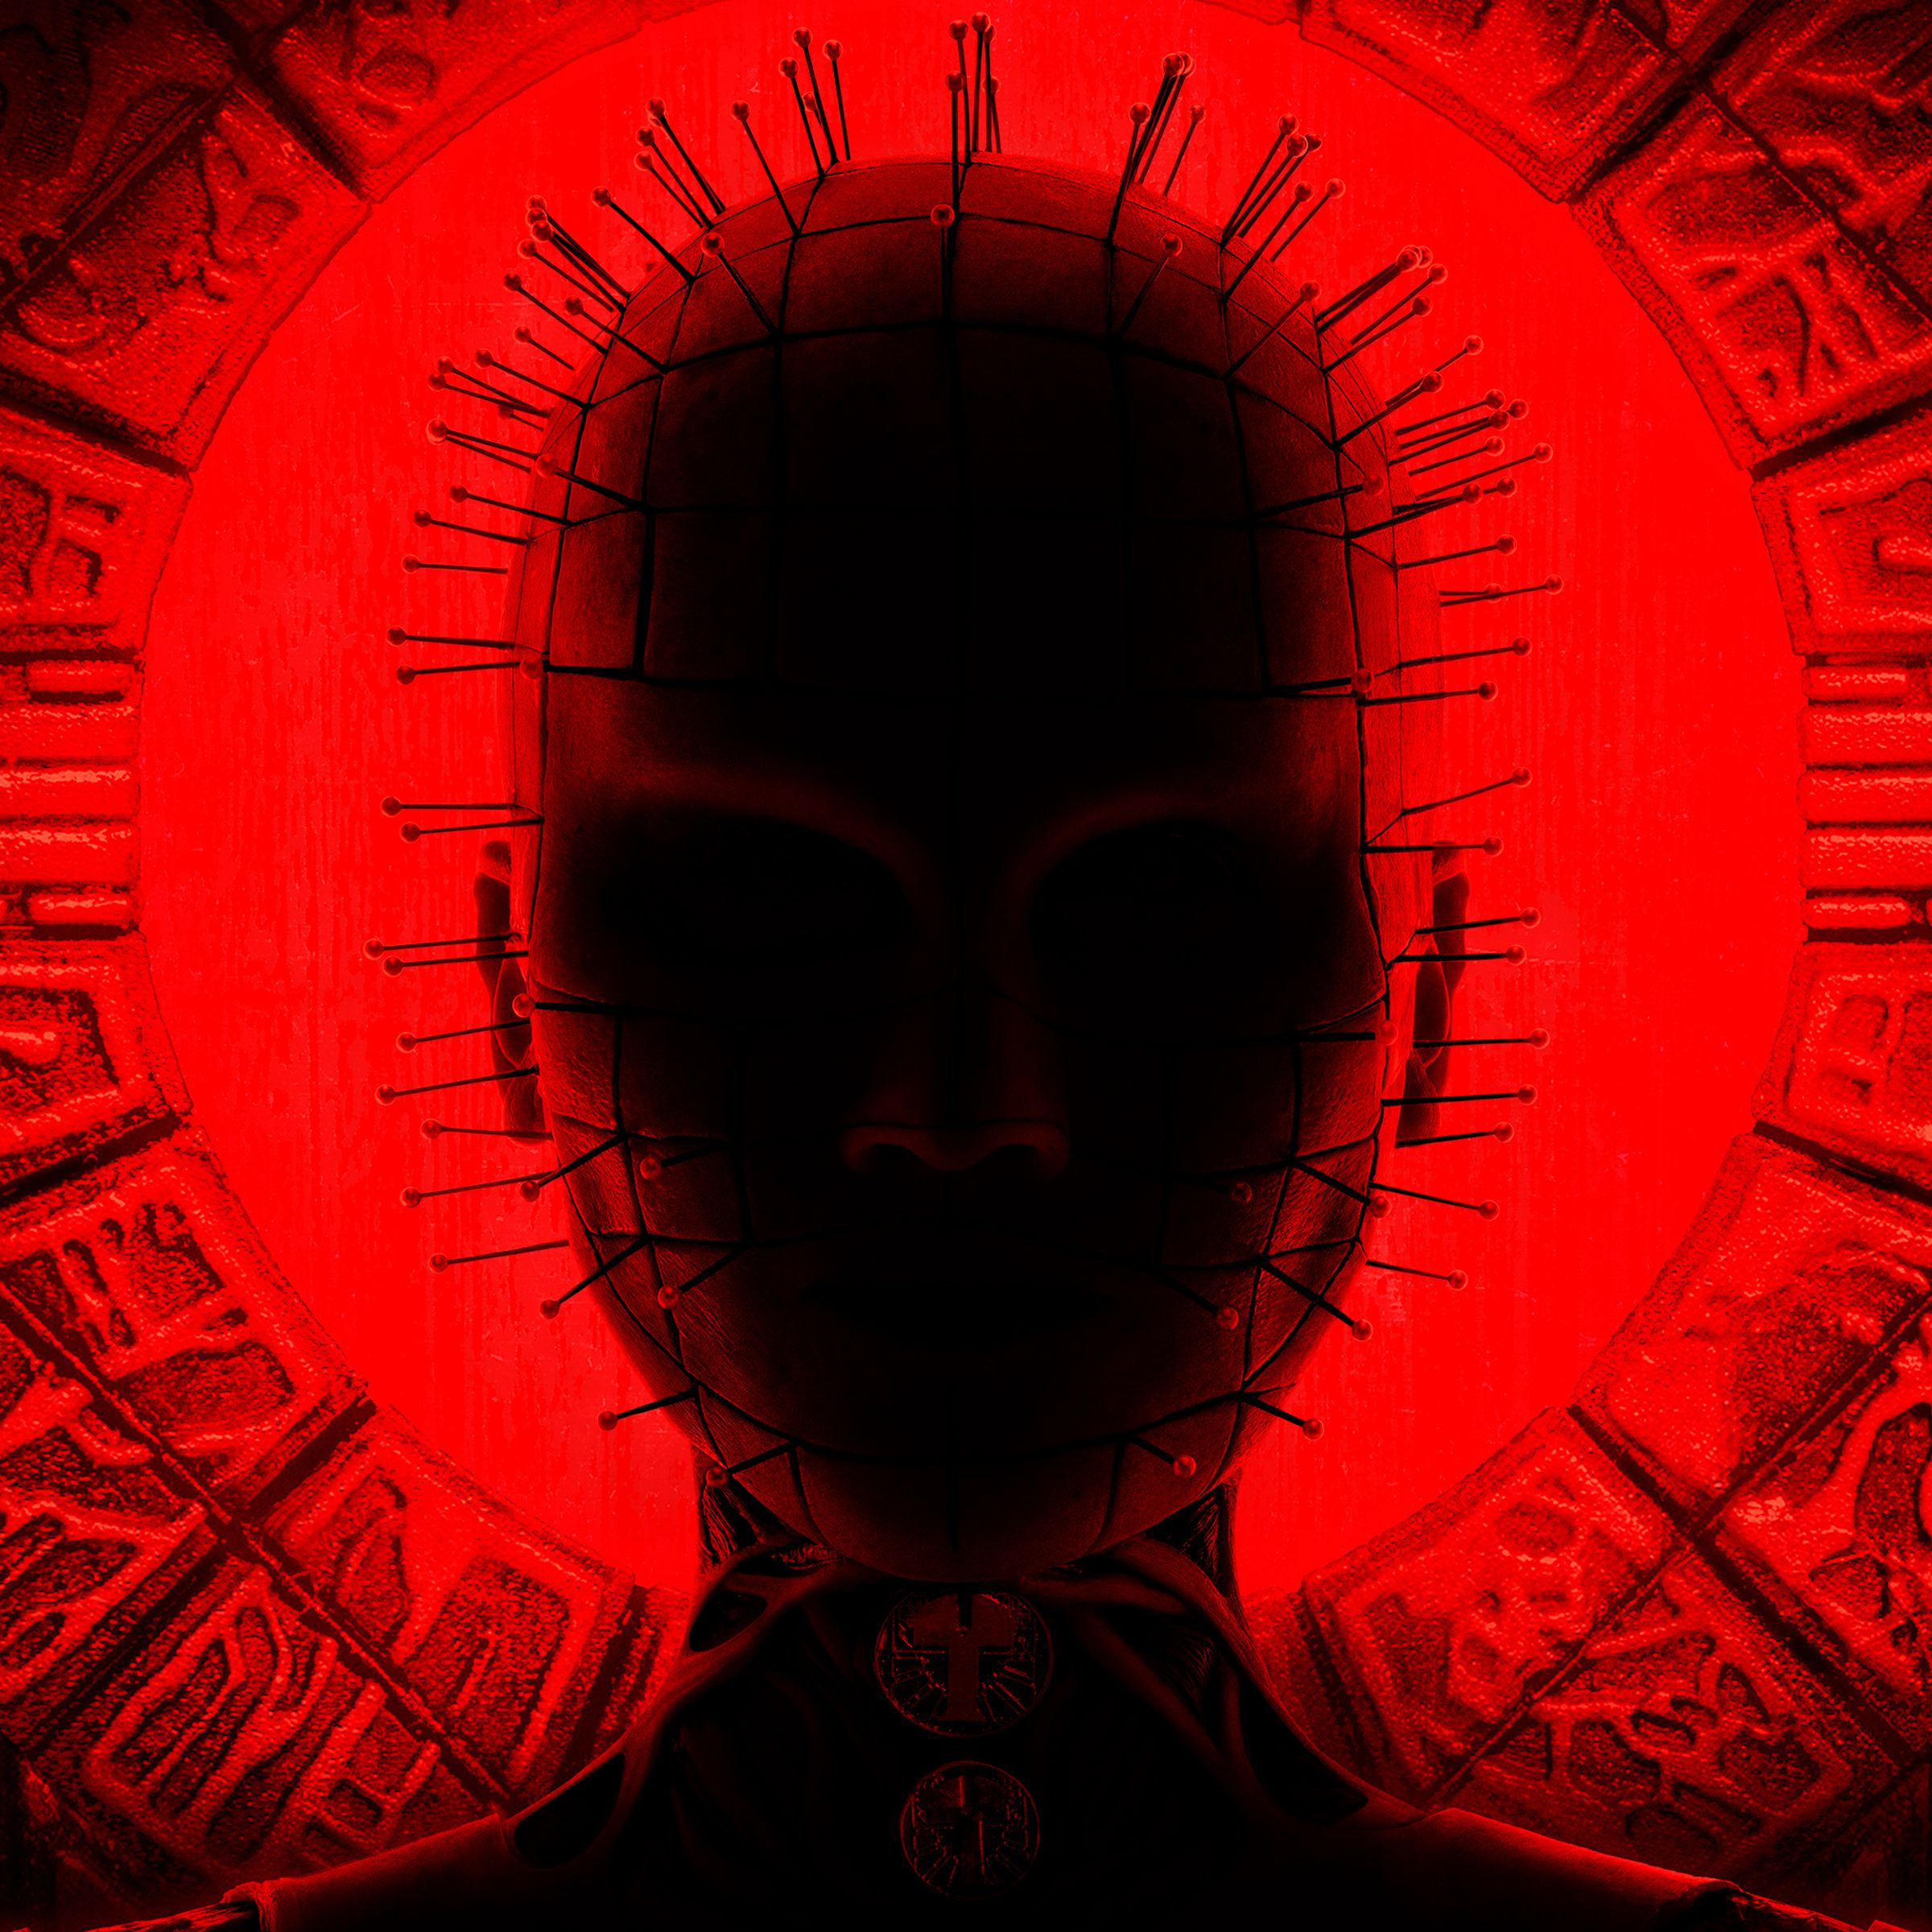 A close-up shot of a bald woman who is cast in shadow but backlit by a red glow that highlights the dozens of thin two-inch-long needles protruding from every part of her face and a pair of circular objects dangling from her throat.